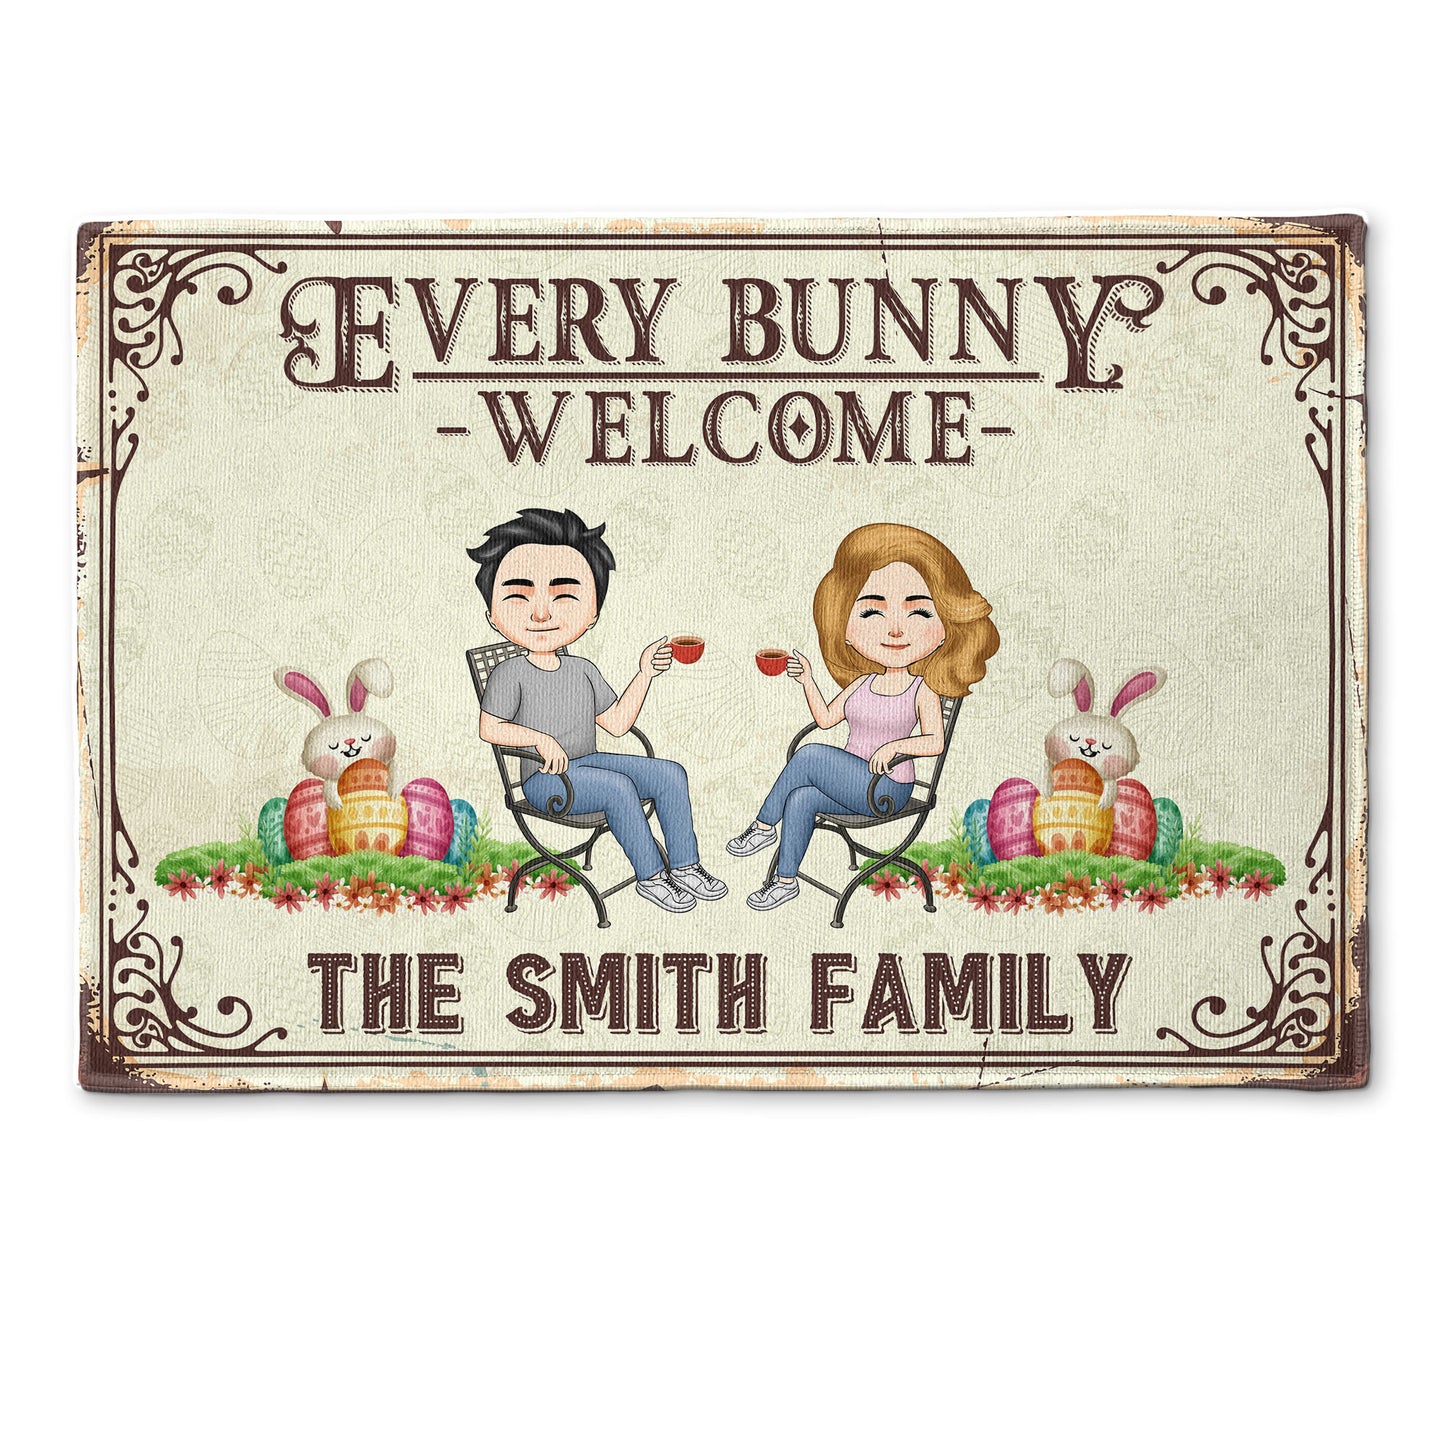 Every Bunny Welcome - Personalized Doormat - Easter Day Gift For Parent, Grandma, Grandpa, Family